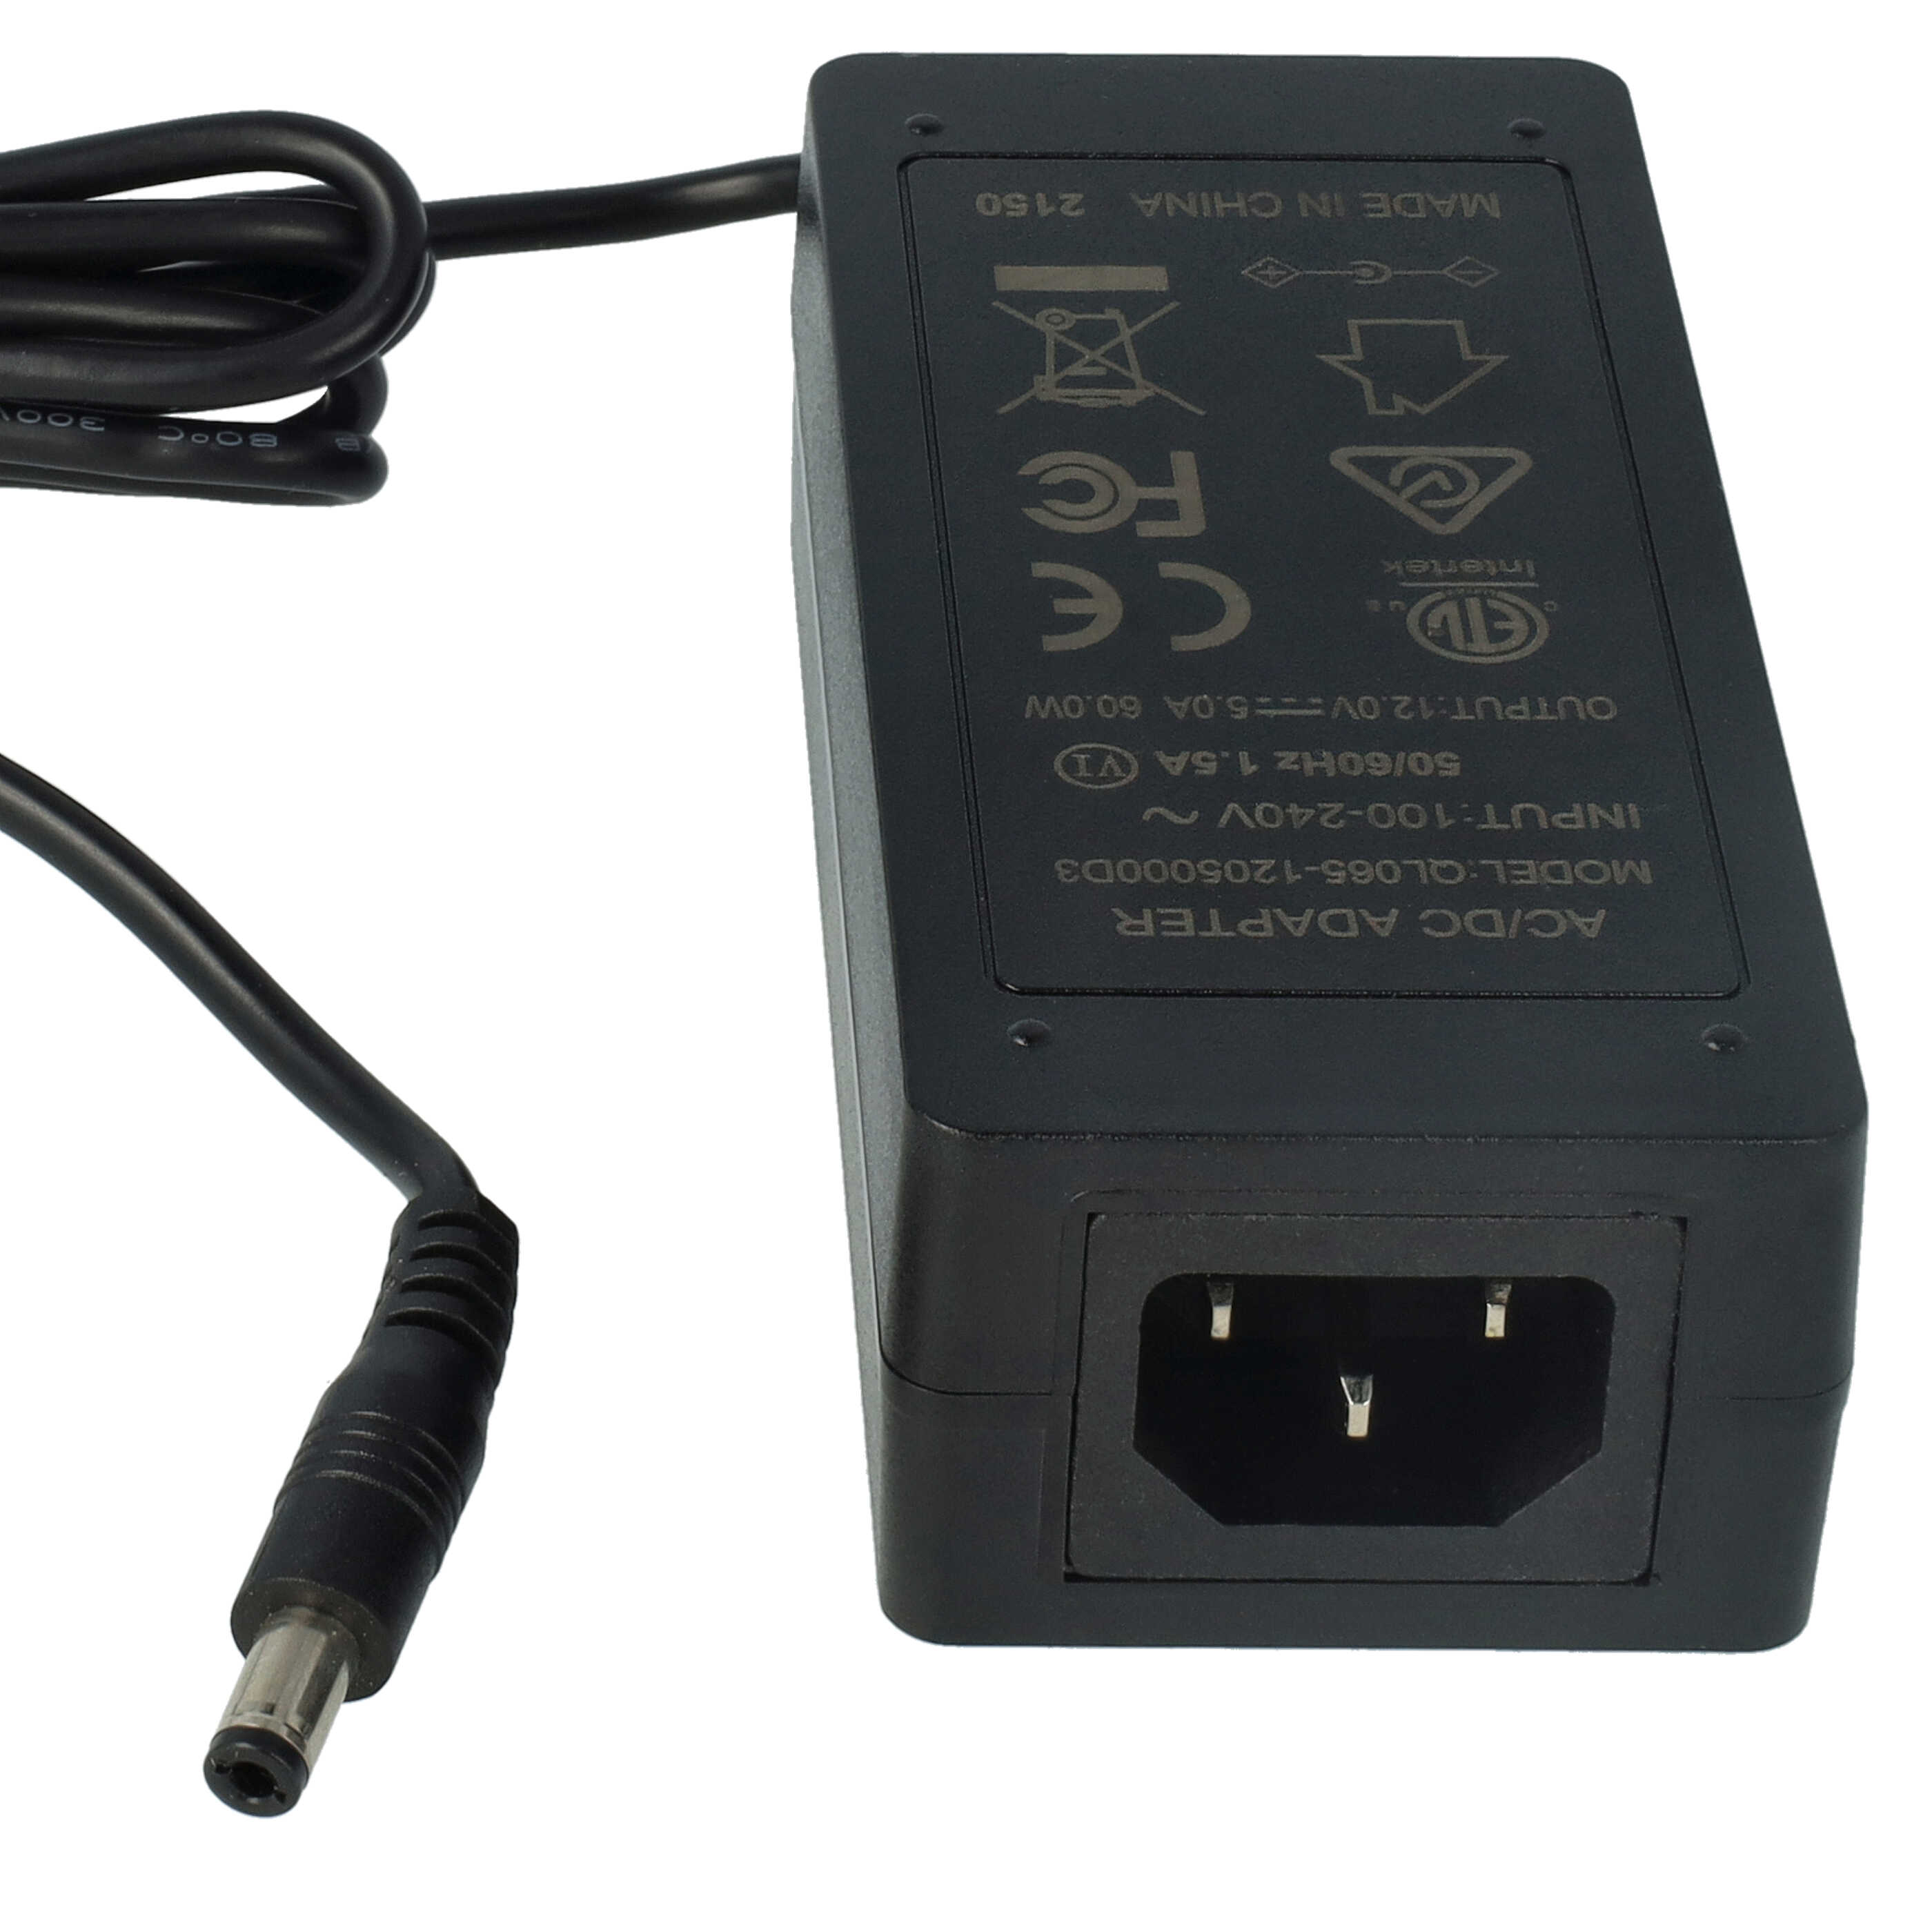 Charger + Mains Adapter Suitable for Motorola HNN9013 Radio Batteries - 7.2 V, 0.5 A